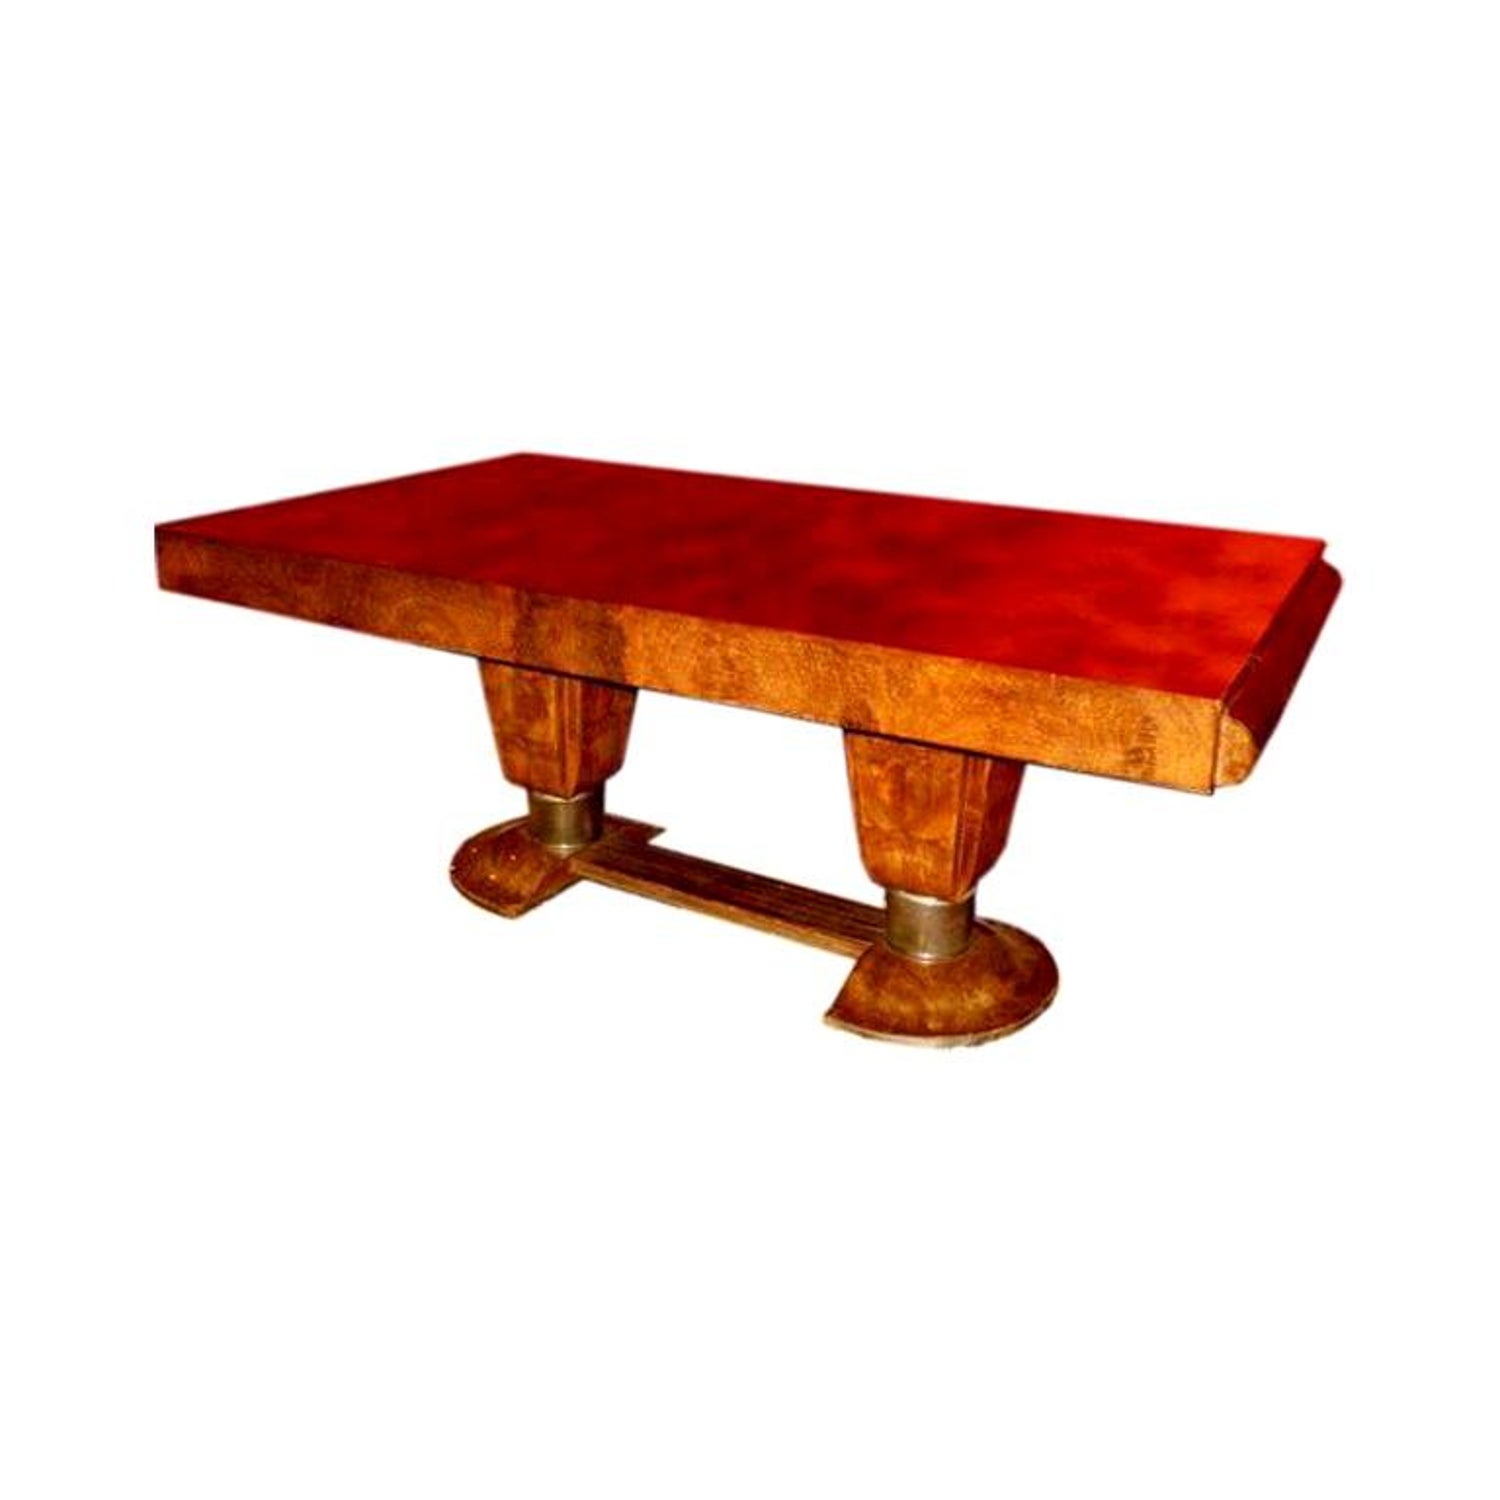 Rare Burl Walnut Dining Table By Ouhayoun David For Sale at 1stDibs